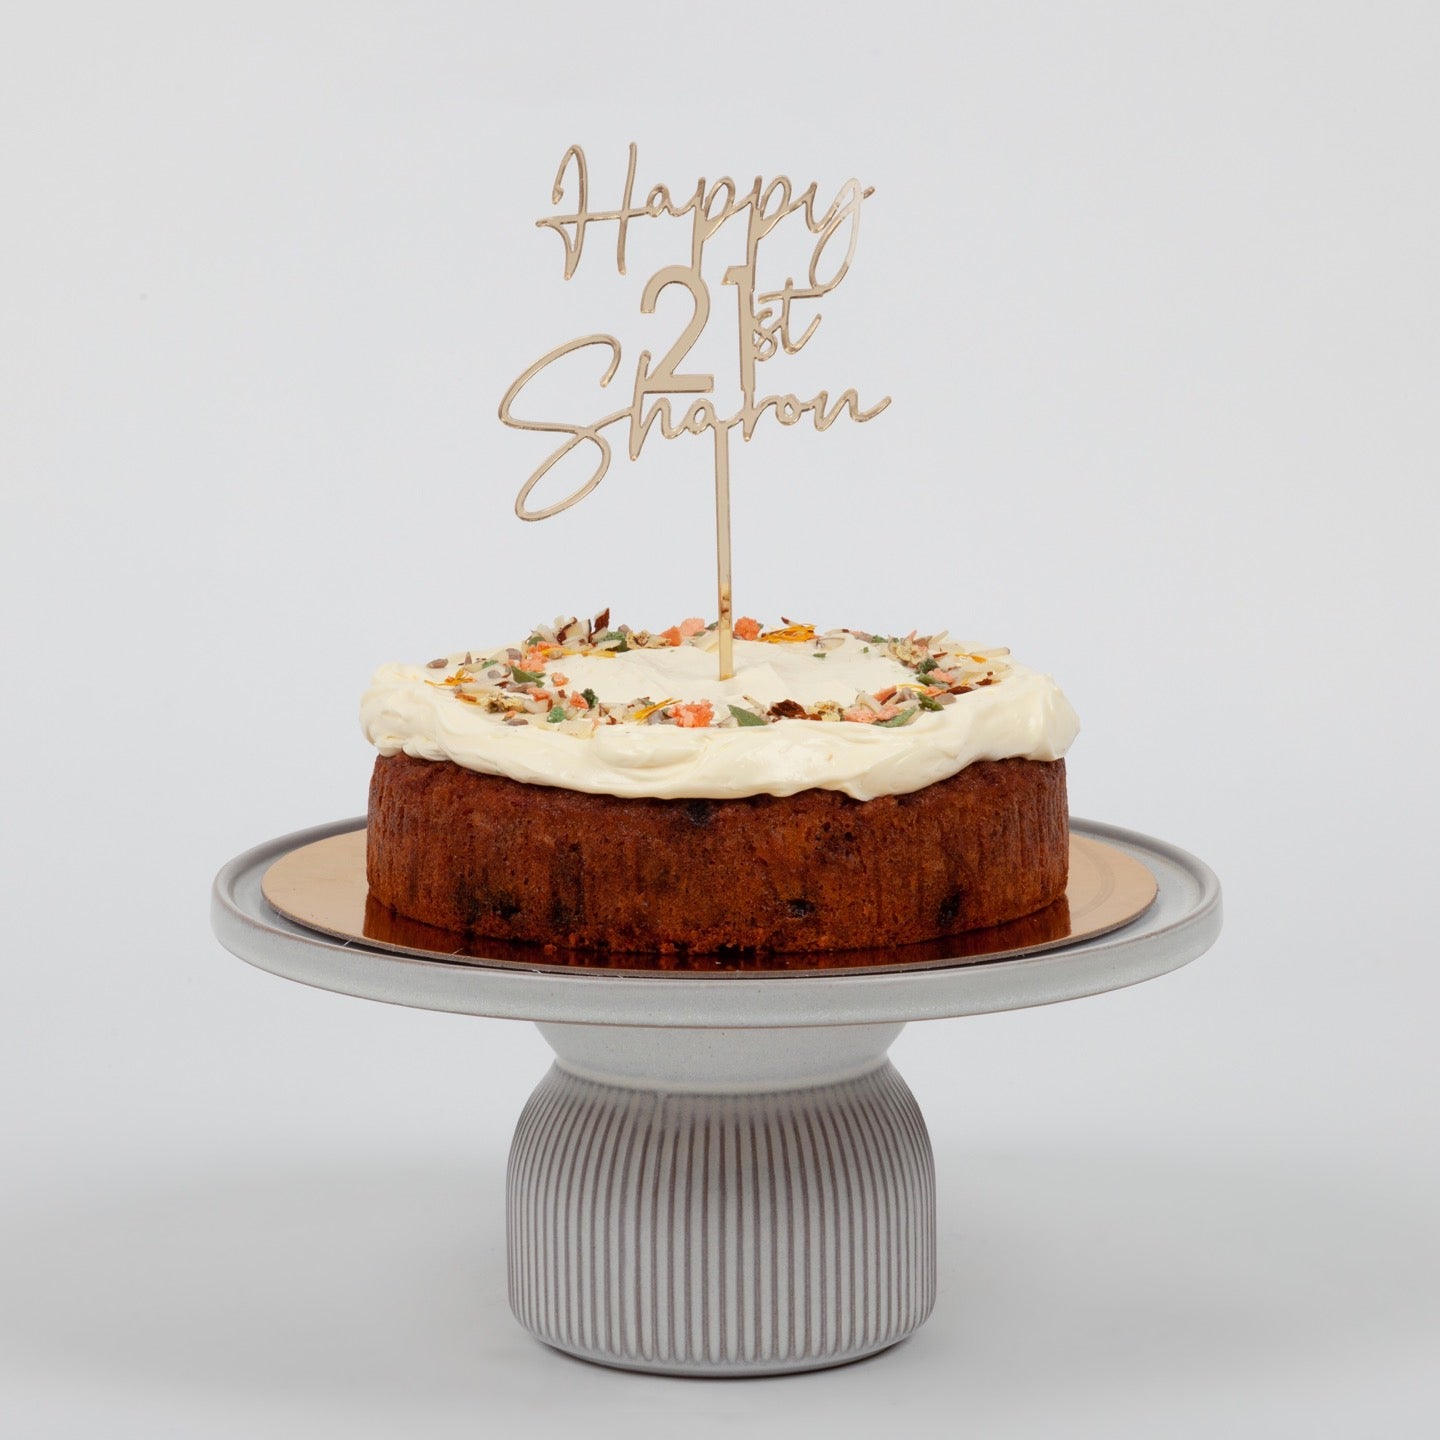 CARROT CAKE GF FRONT WITH GOLD MIRROT CUSTOM CAKE TOPPER